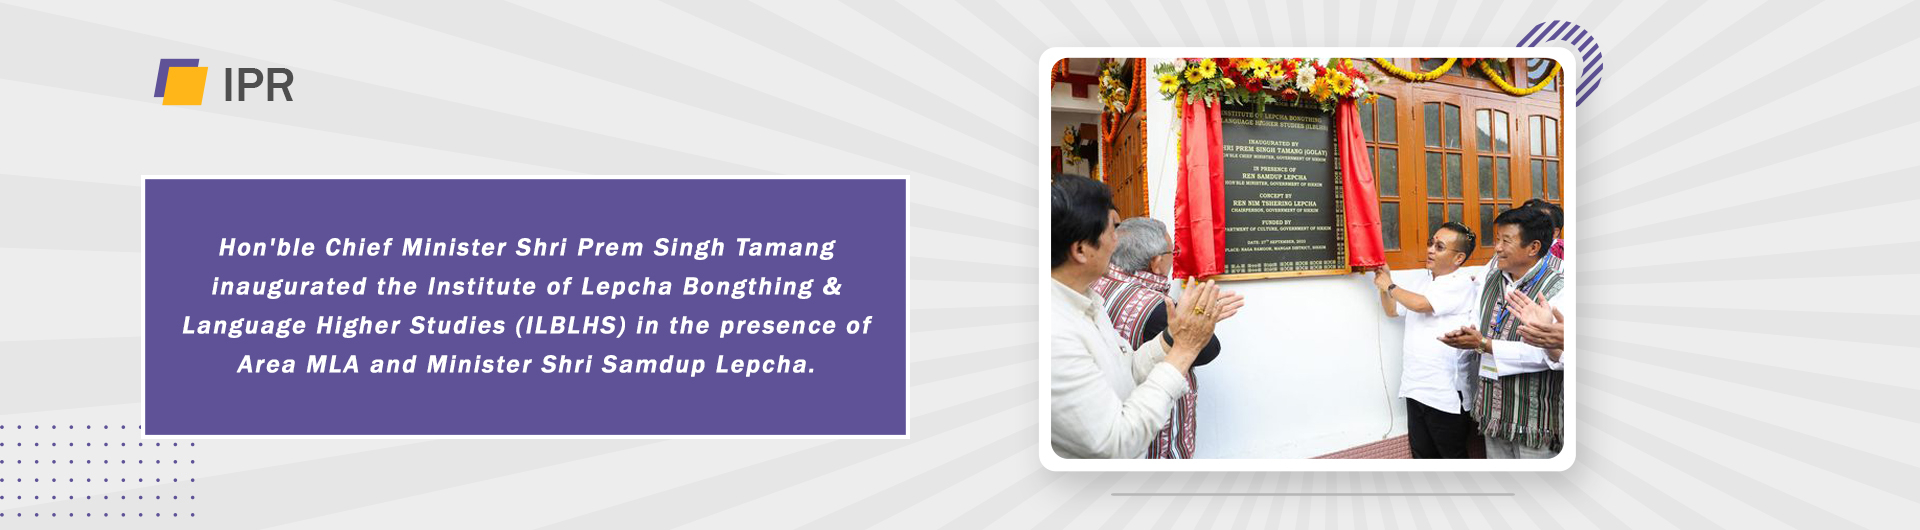 Hon'ble Chief Minister Shri Prem Singh Tamang inaugurated the Institute of Lepcha Bongthing & Language Higher Studies (ILBLHS) in the presence of Area MLA and Minister Shri Samdup Lepcha.